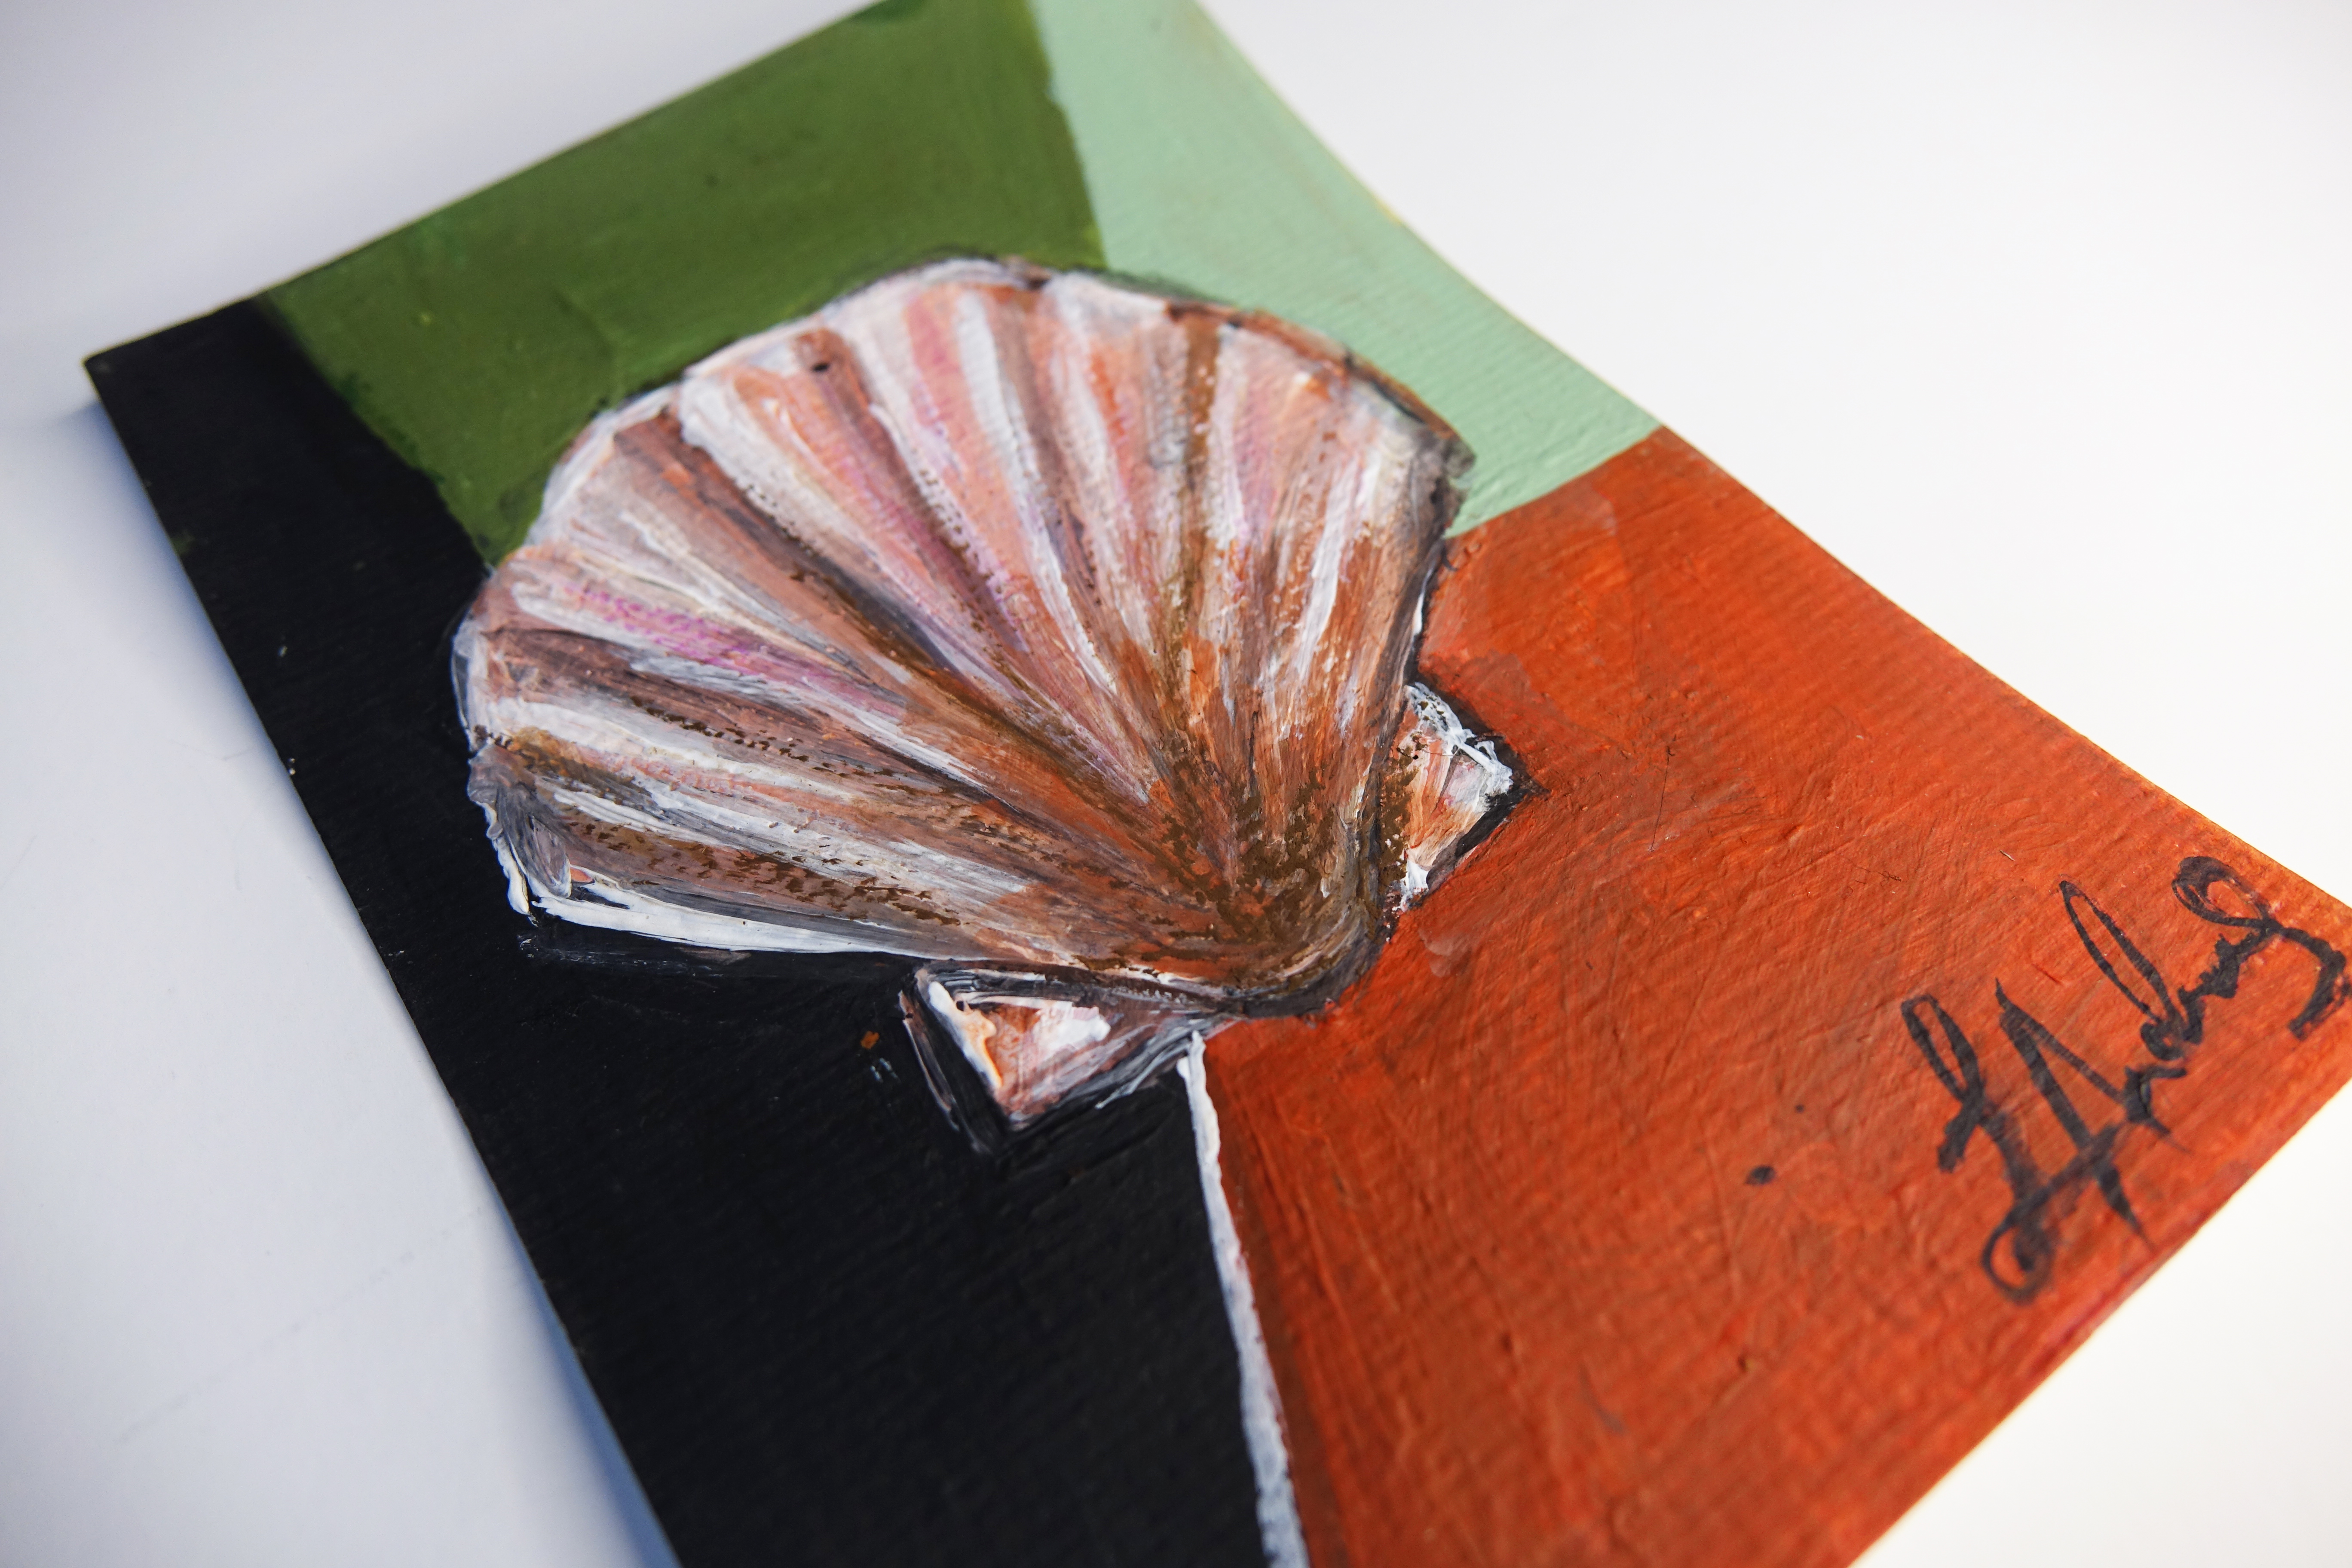 35. Layla Andrews - One Scallop in the Post - DETAIL